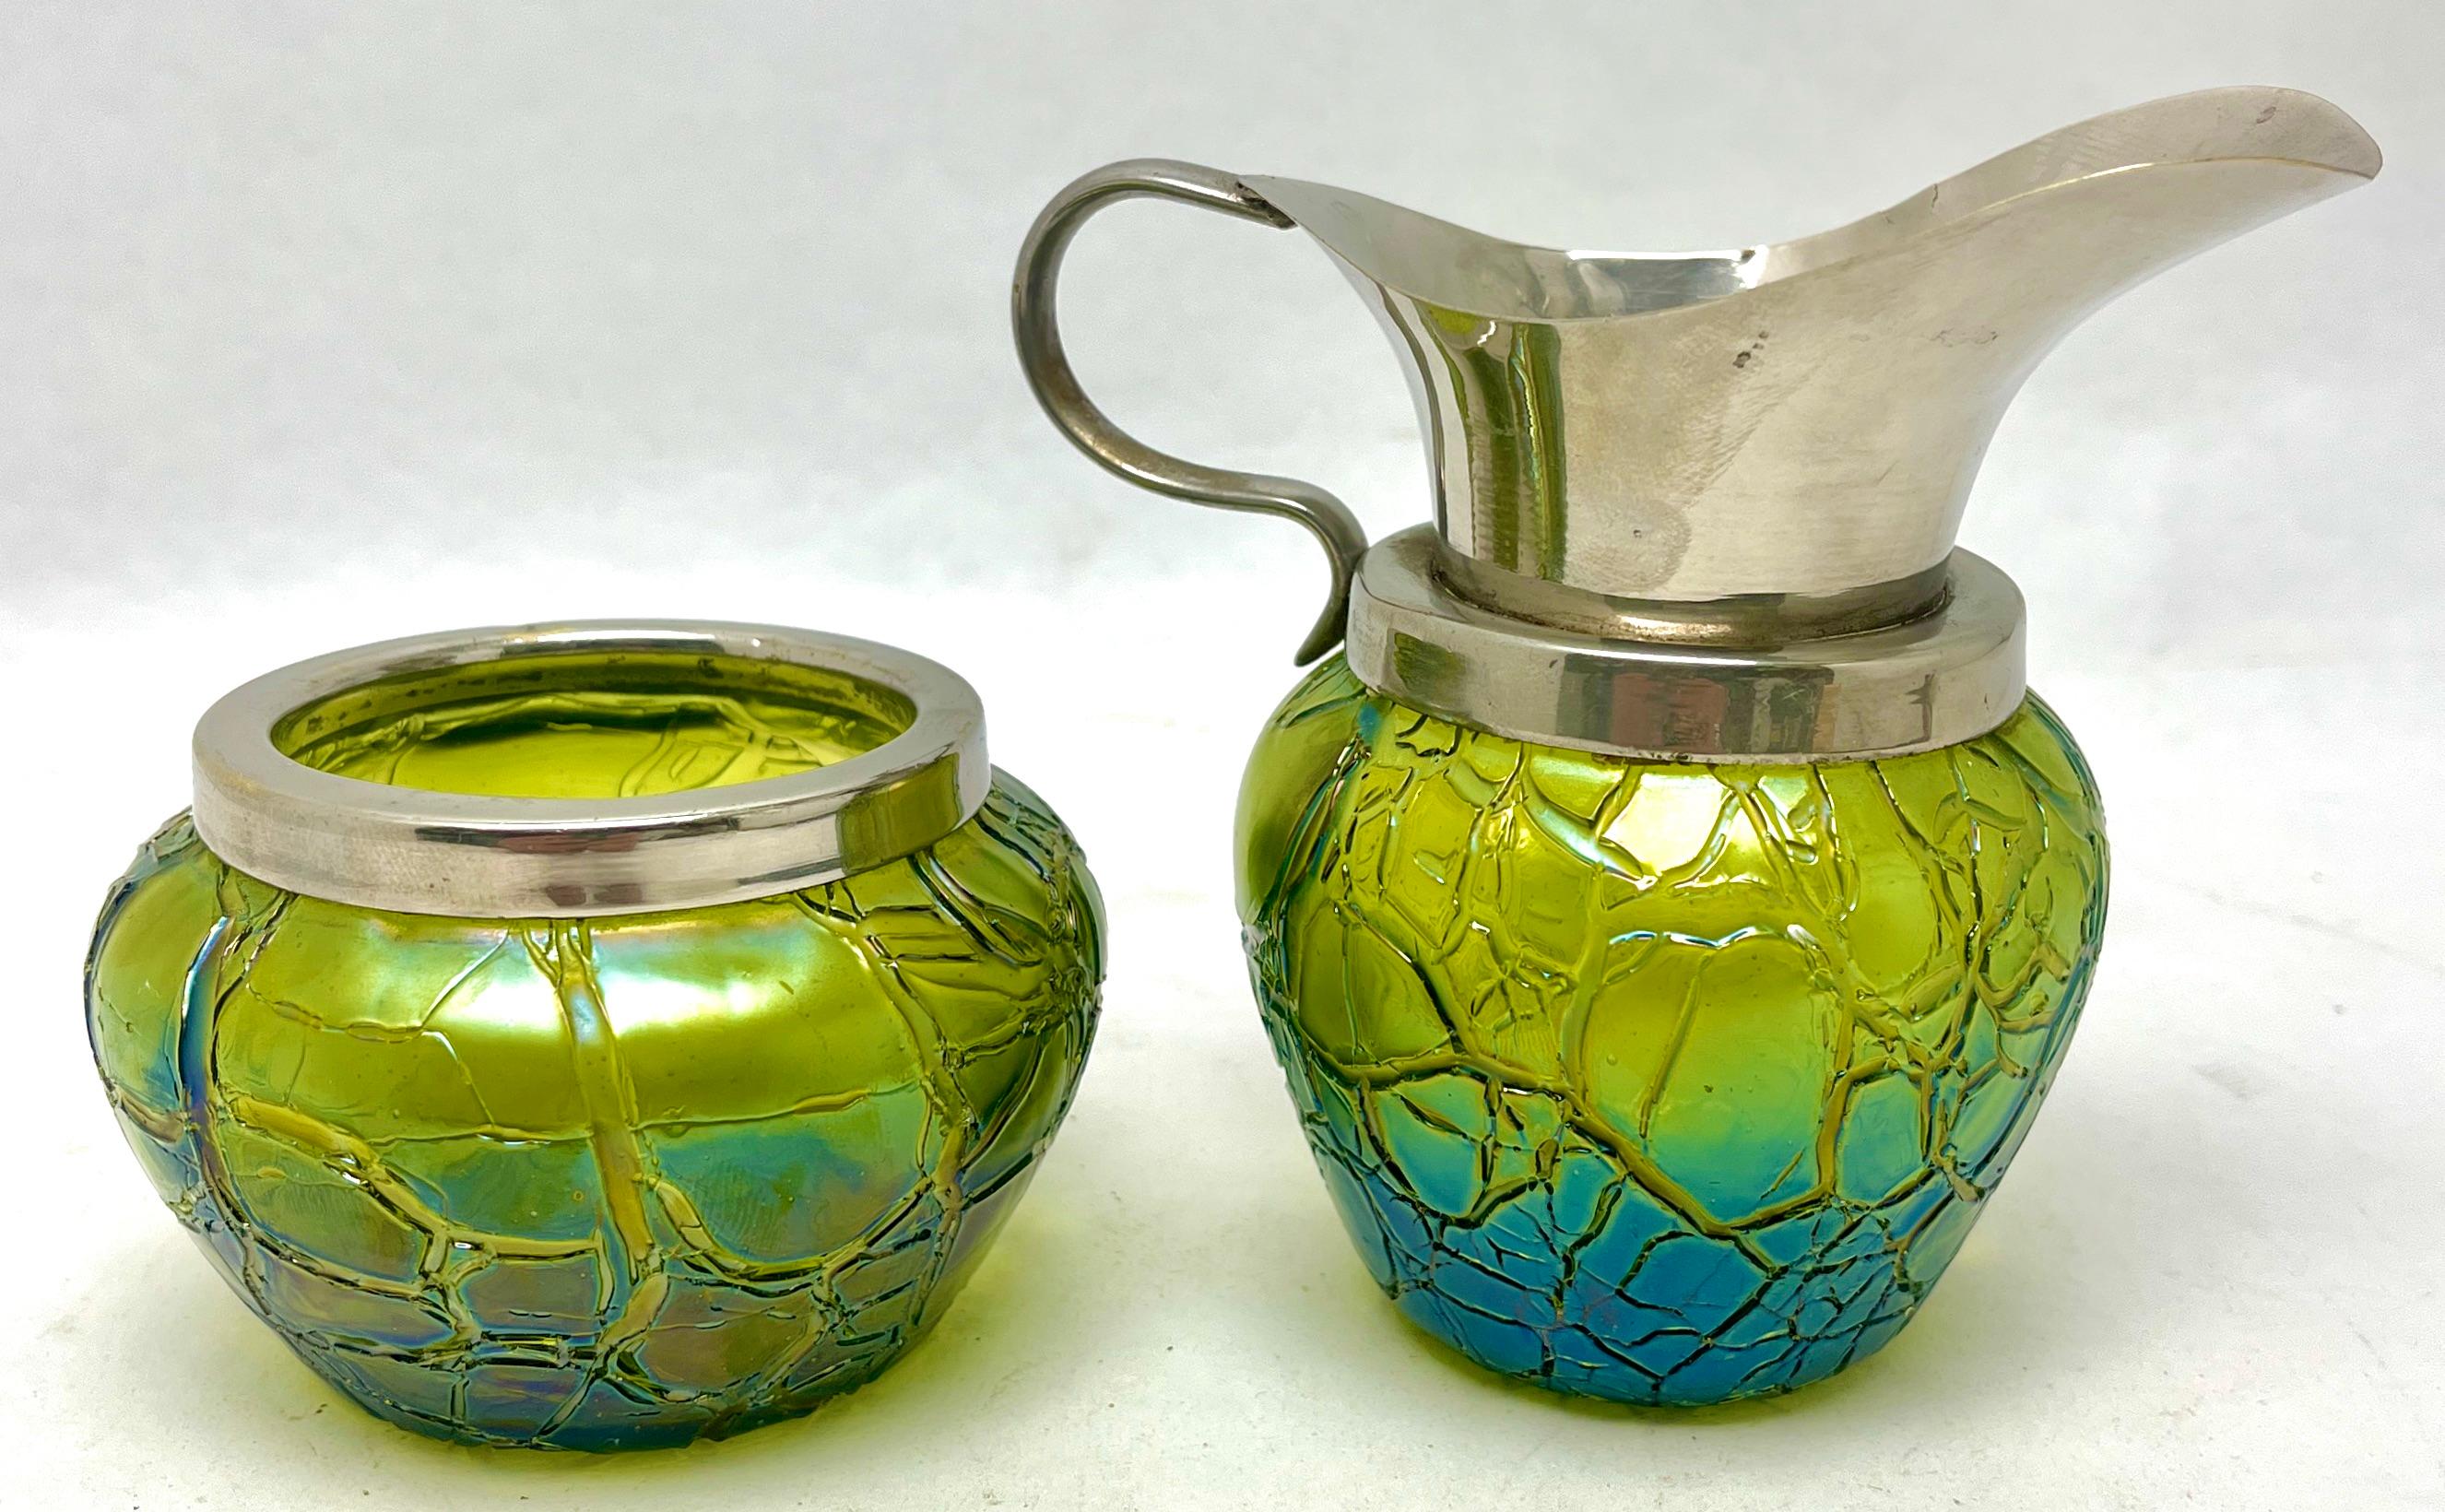 Loetz Art Nouveau cream jug and sugar bowl with details of Irradiated glass.

Beautifully decorated whit Irradiated glass.
Rare to find with original condition.

The piece is in good condition and a real beauty!
Photography fails to capture